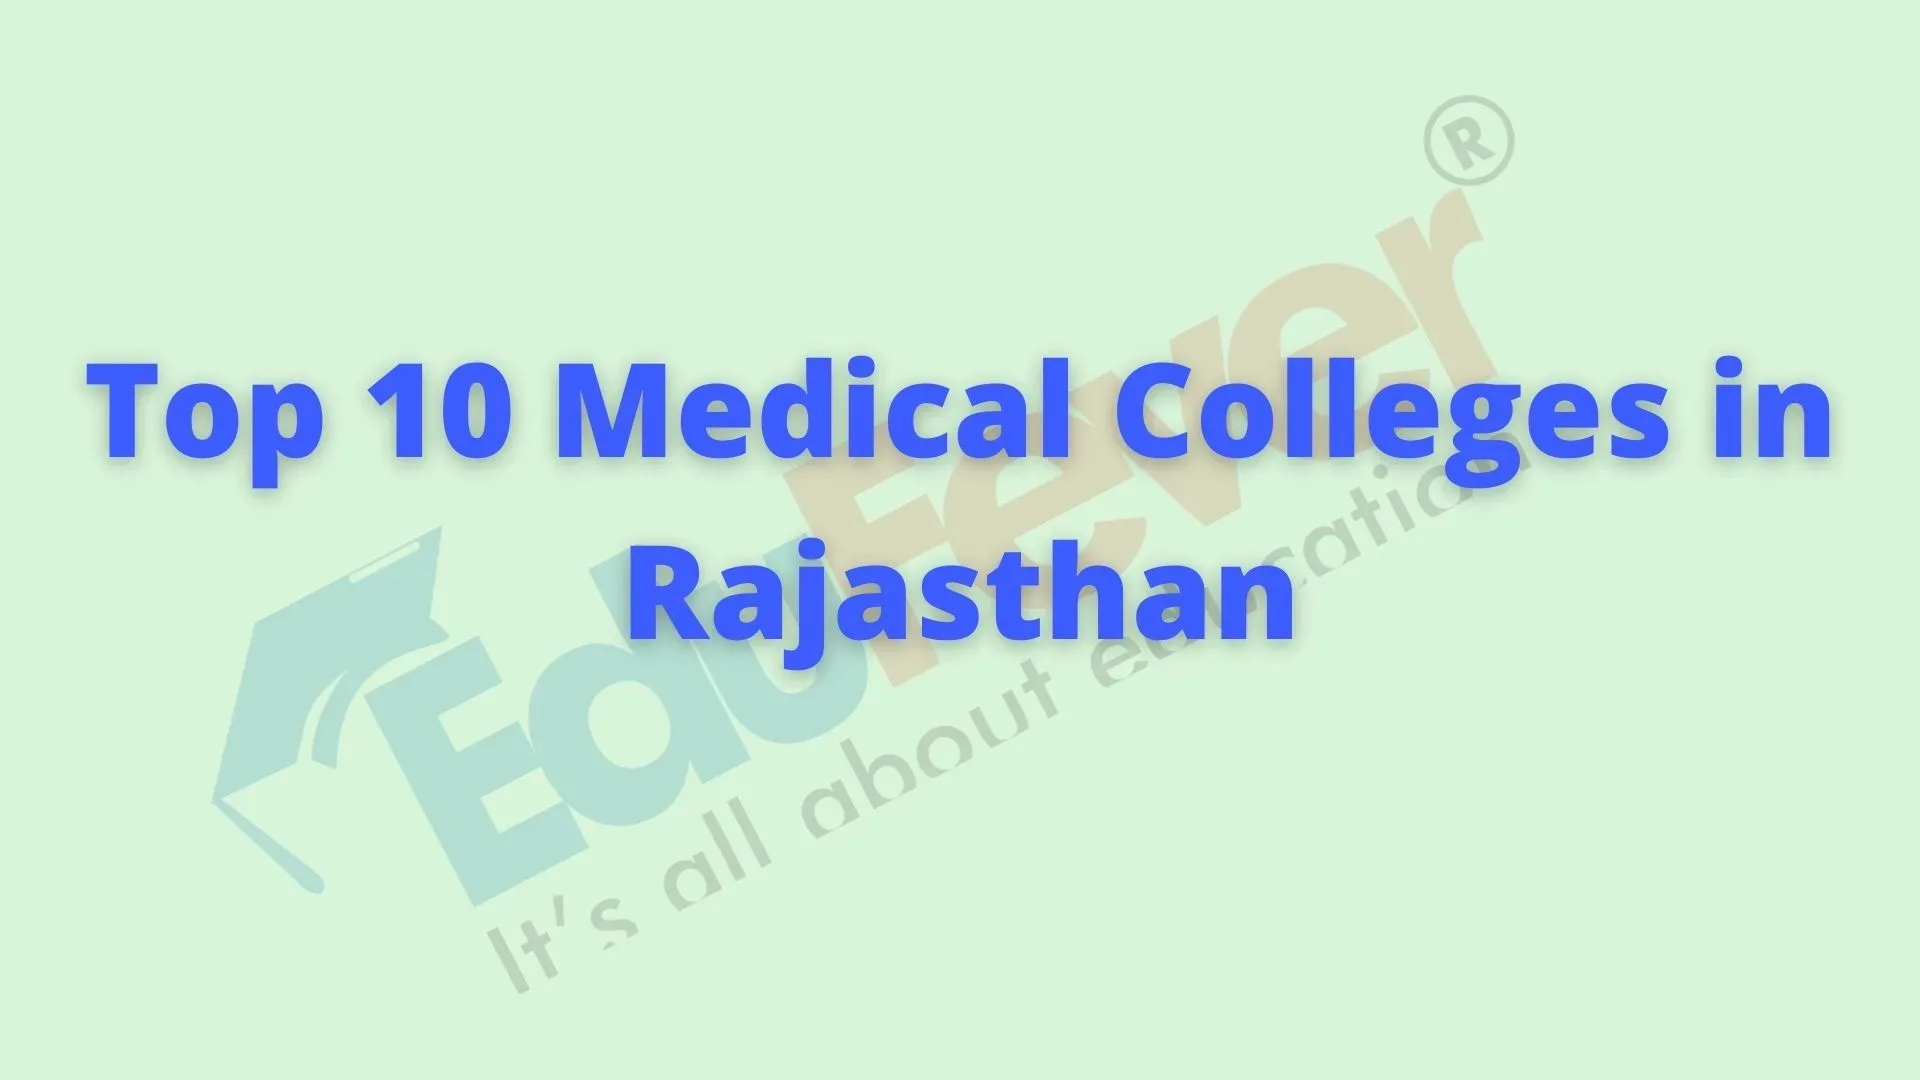 Top 10 Medical Colleges in Rajasthan